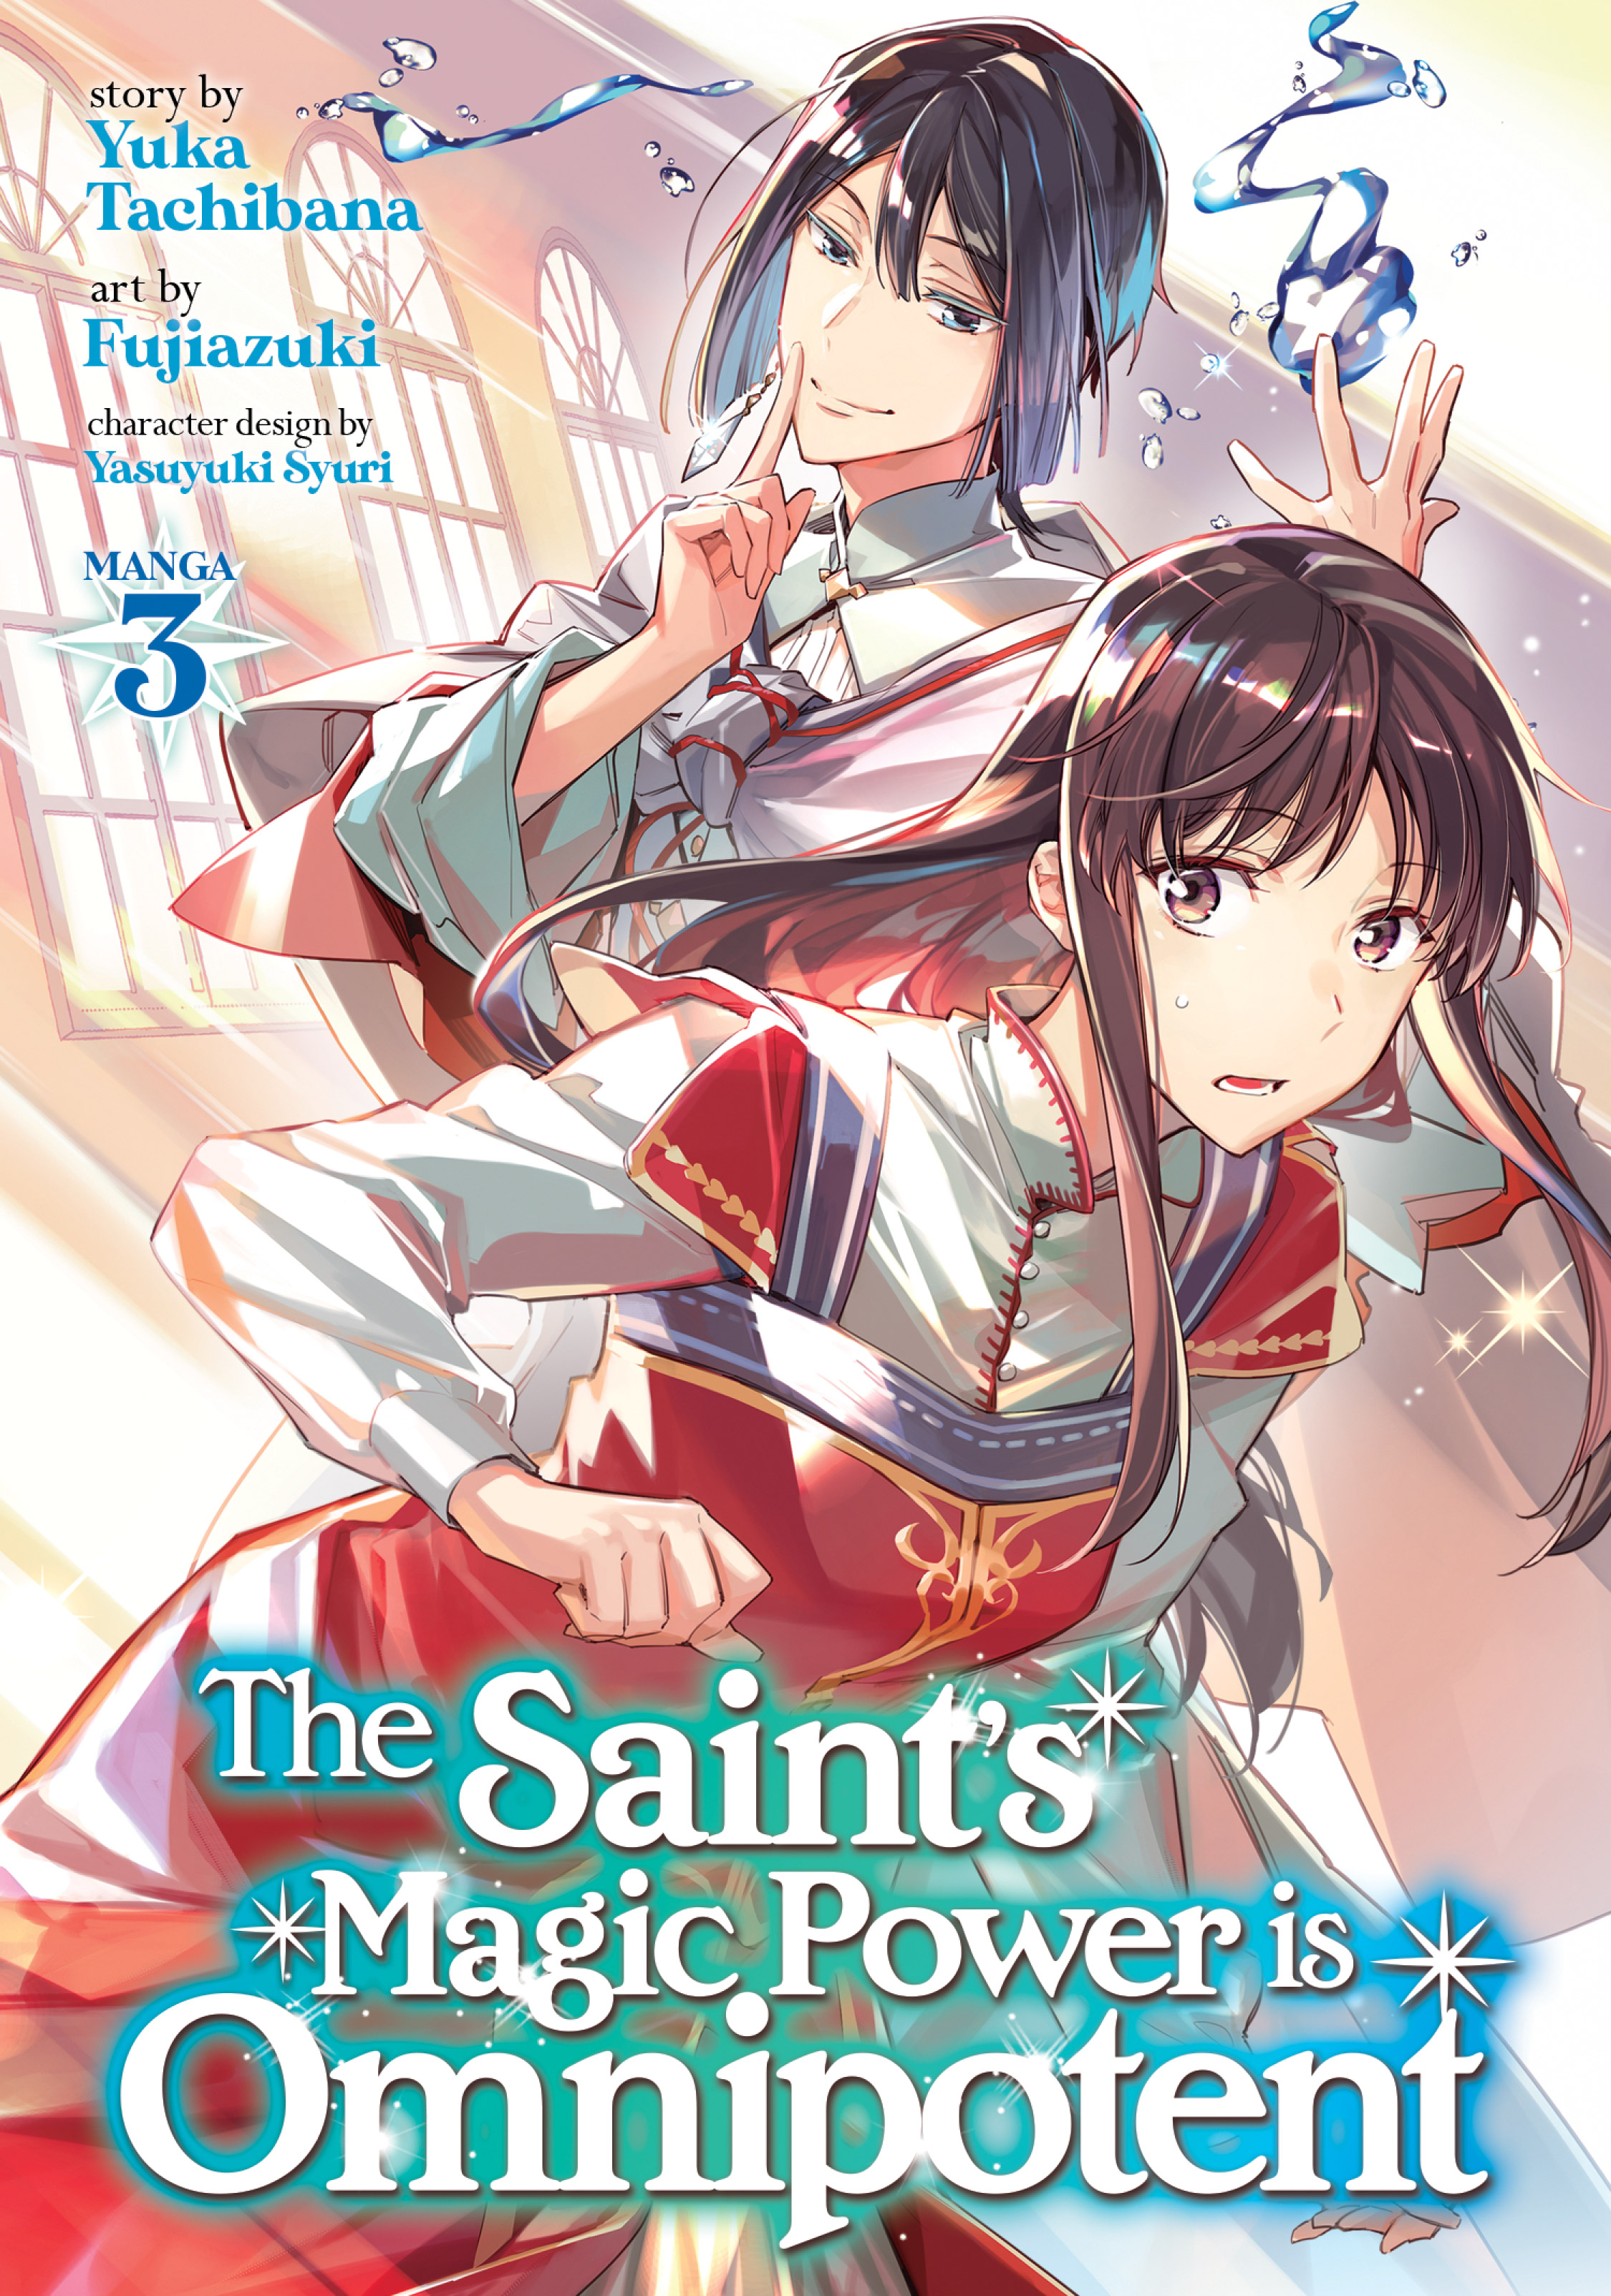 The Saint's Magic Power is Omnipotent season 2 reveals release